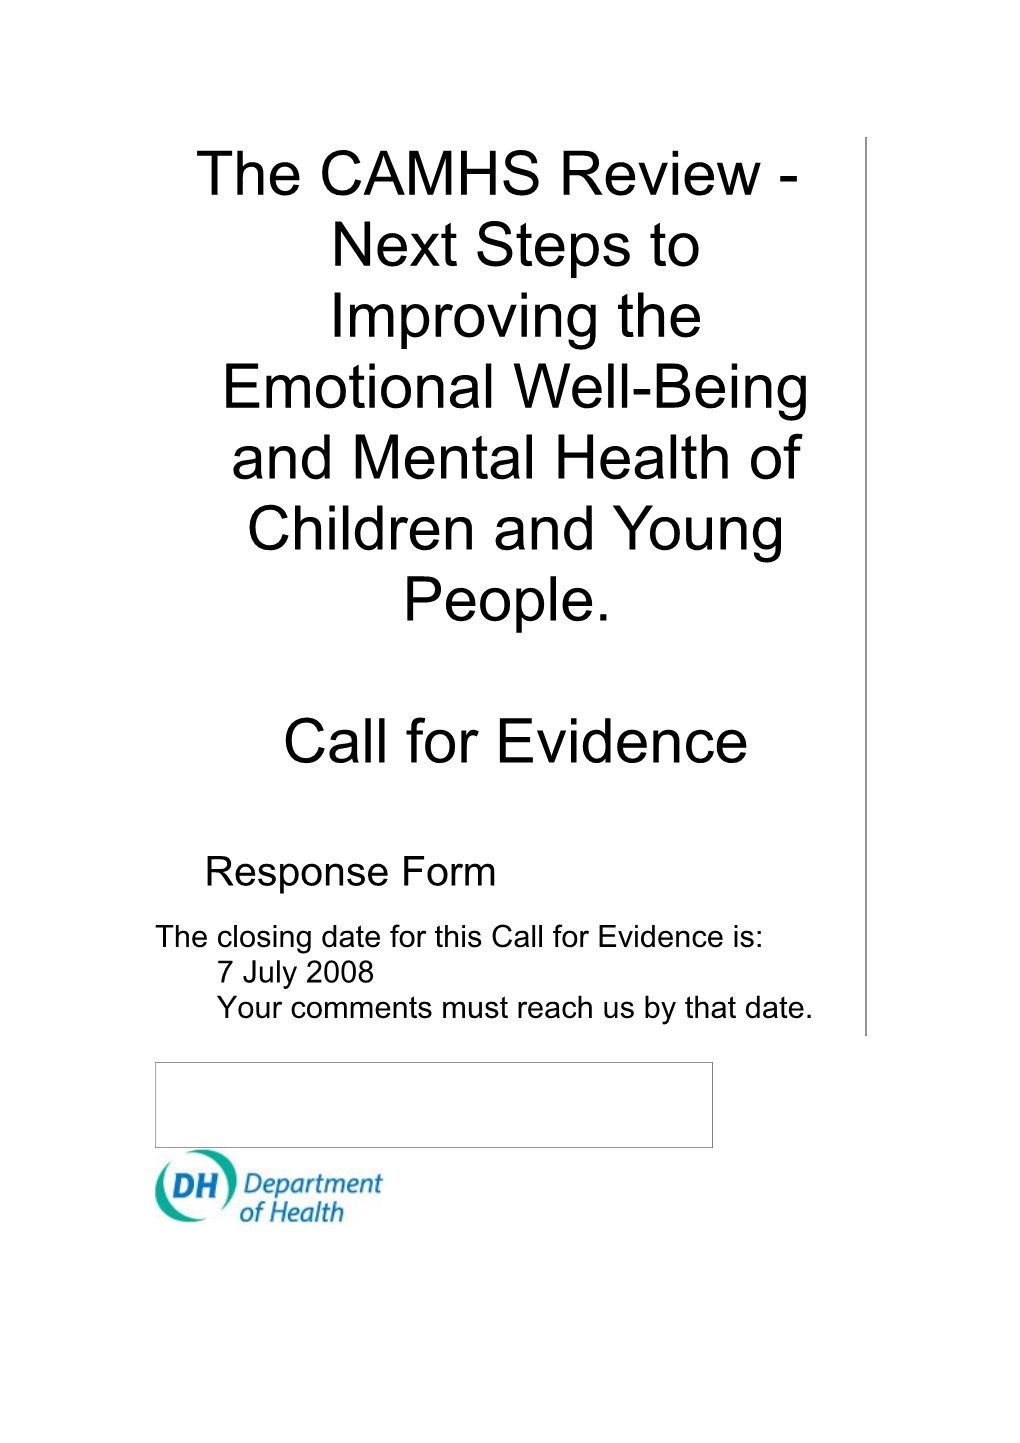 The CAMHS Review - Next Steps to Improving the Emotional Well-Being and Mental Health Of